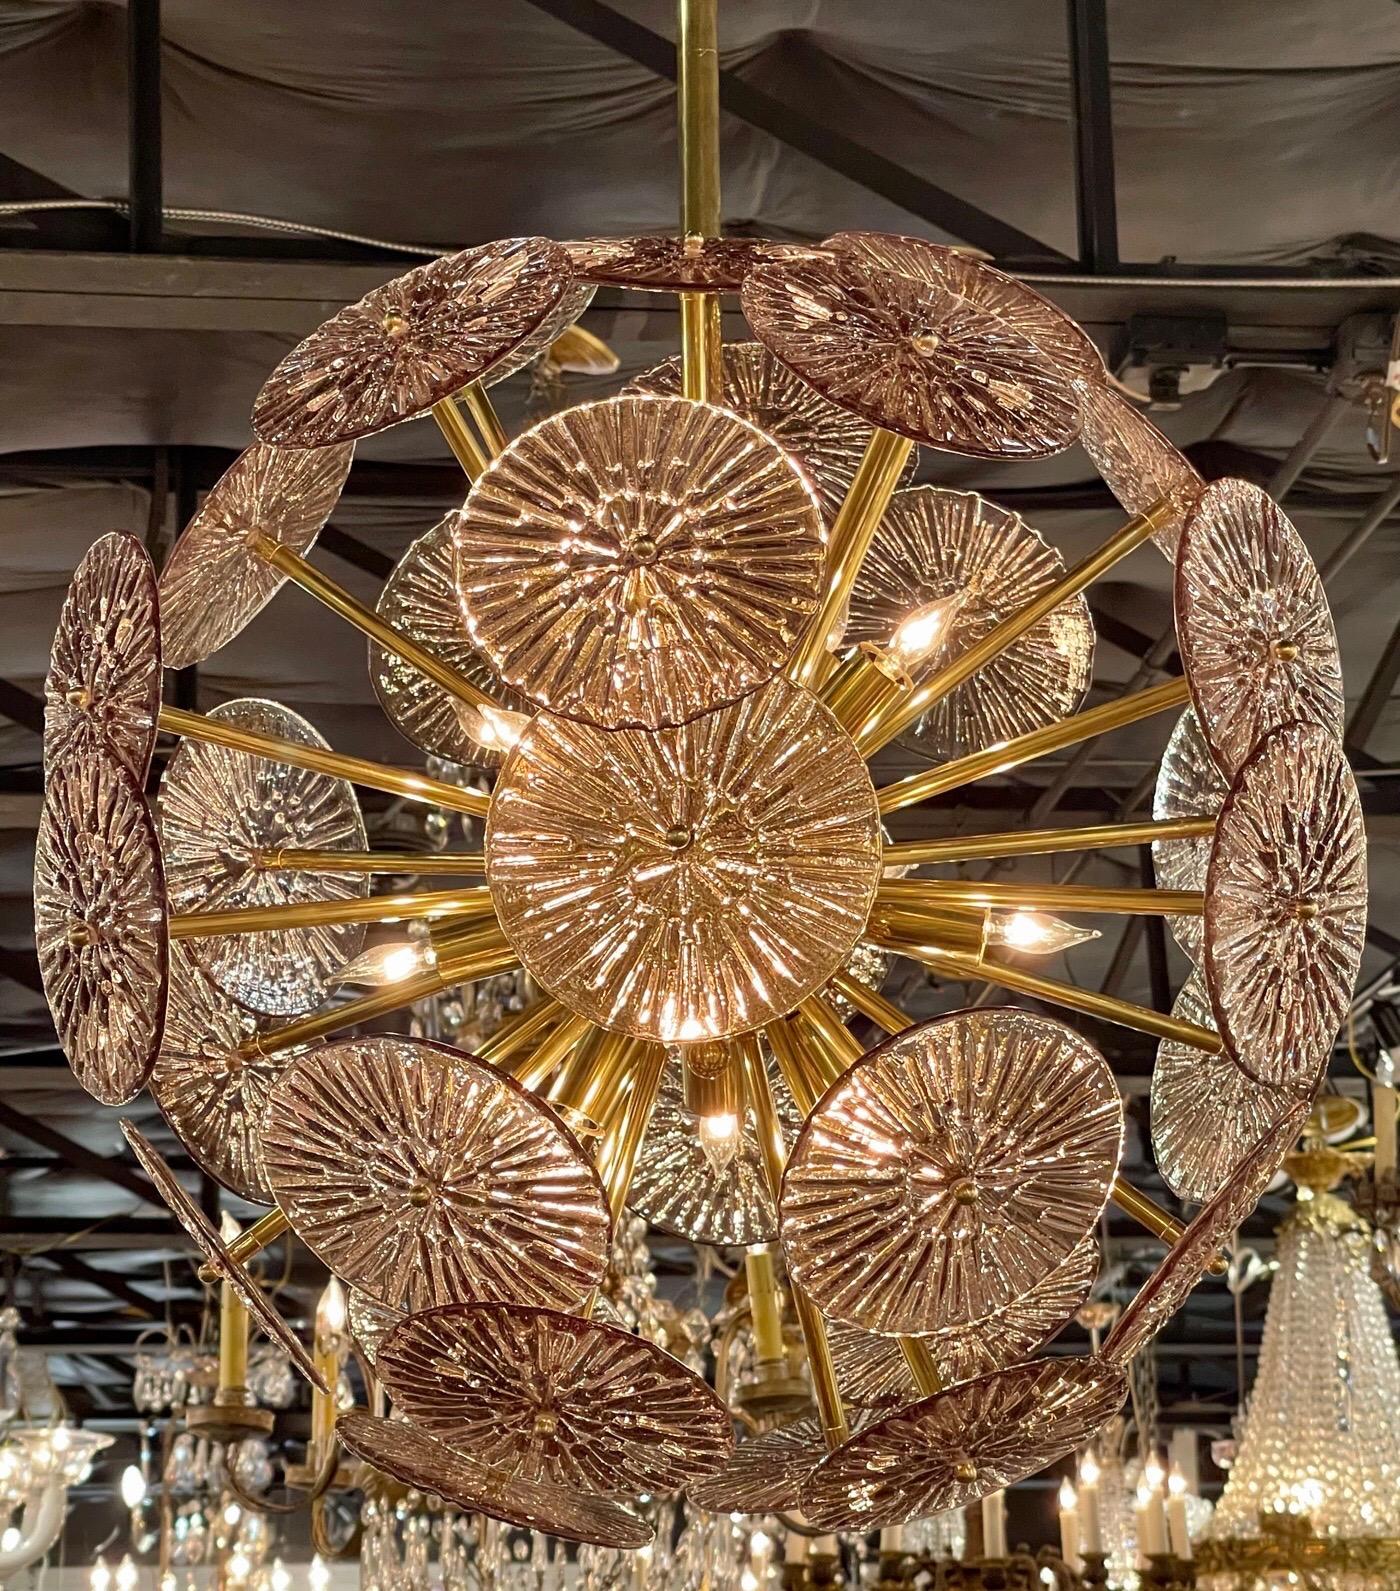 Decorative modern pink murano glass and brass like disc form sputnik sphere chandelier. The discs have a flower like appearance and the brass base is super pretty as well. A true work of art!